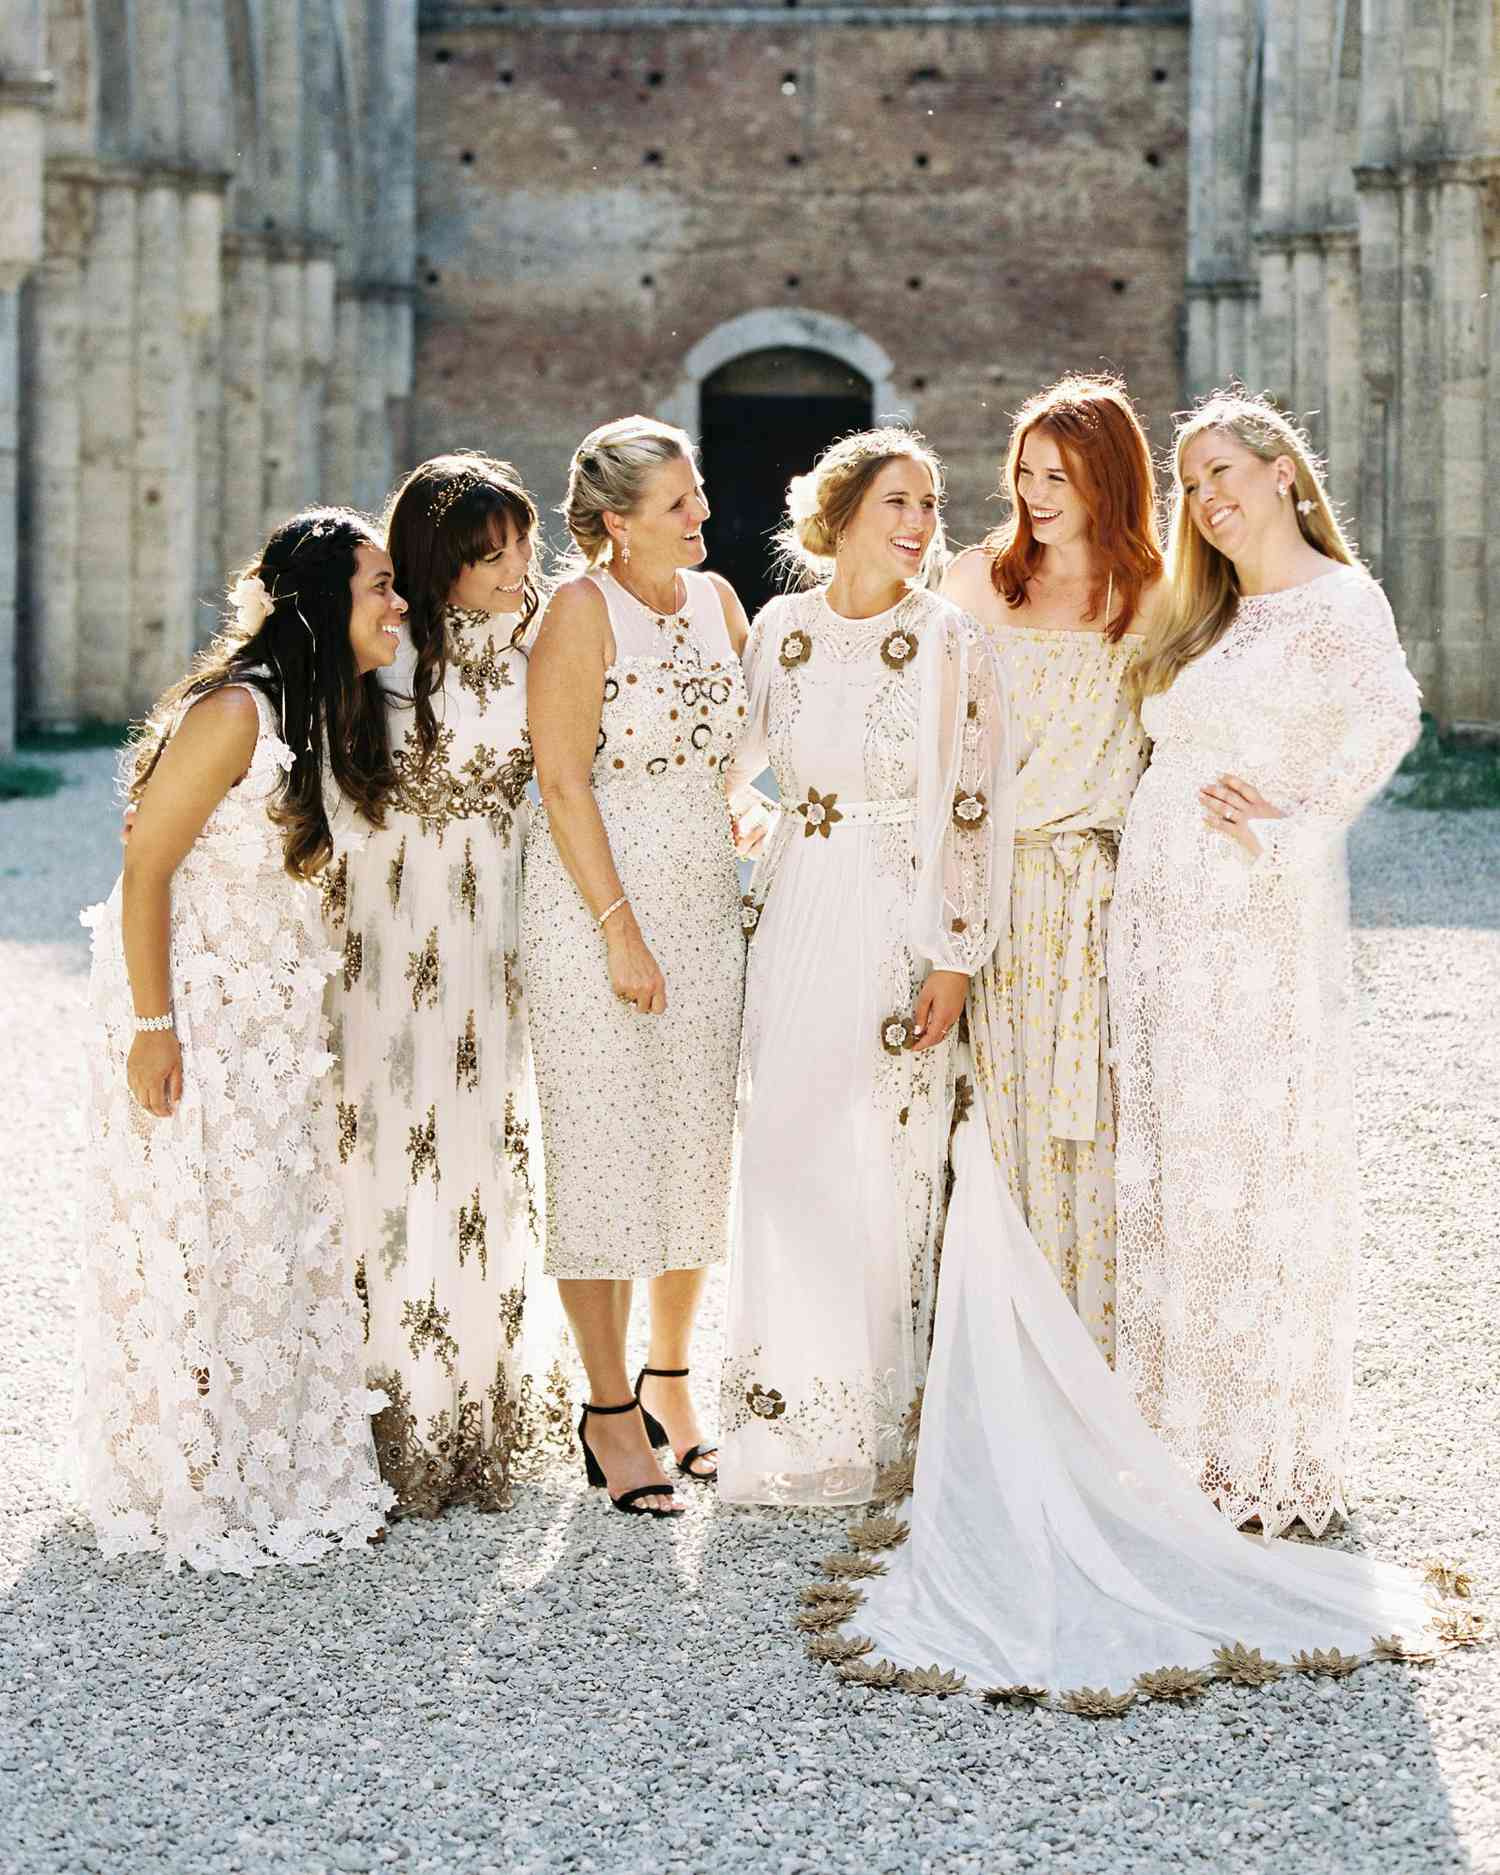 Should you be hands-on with the bridesmaids?